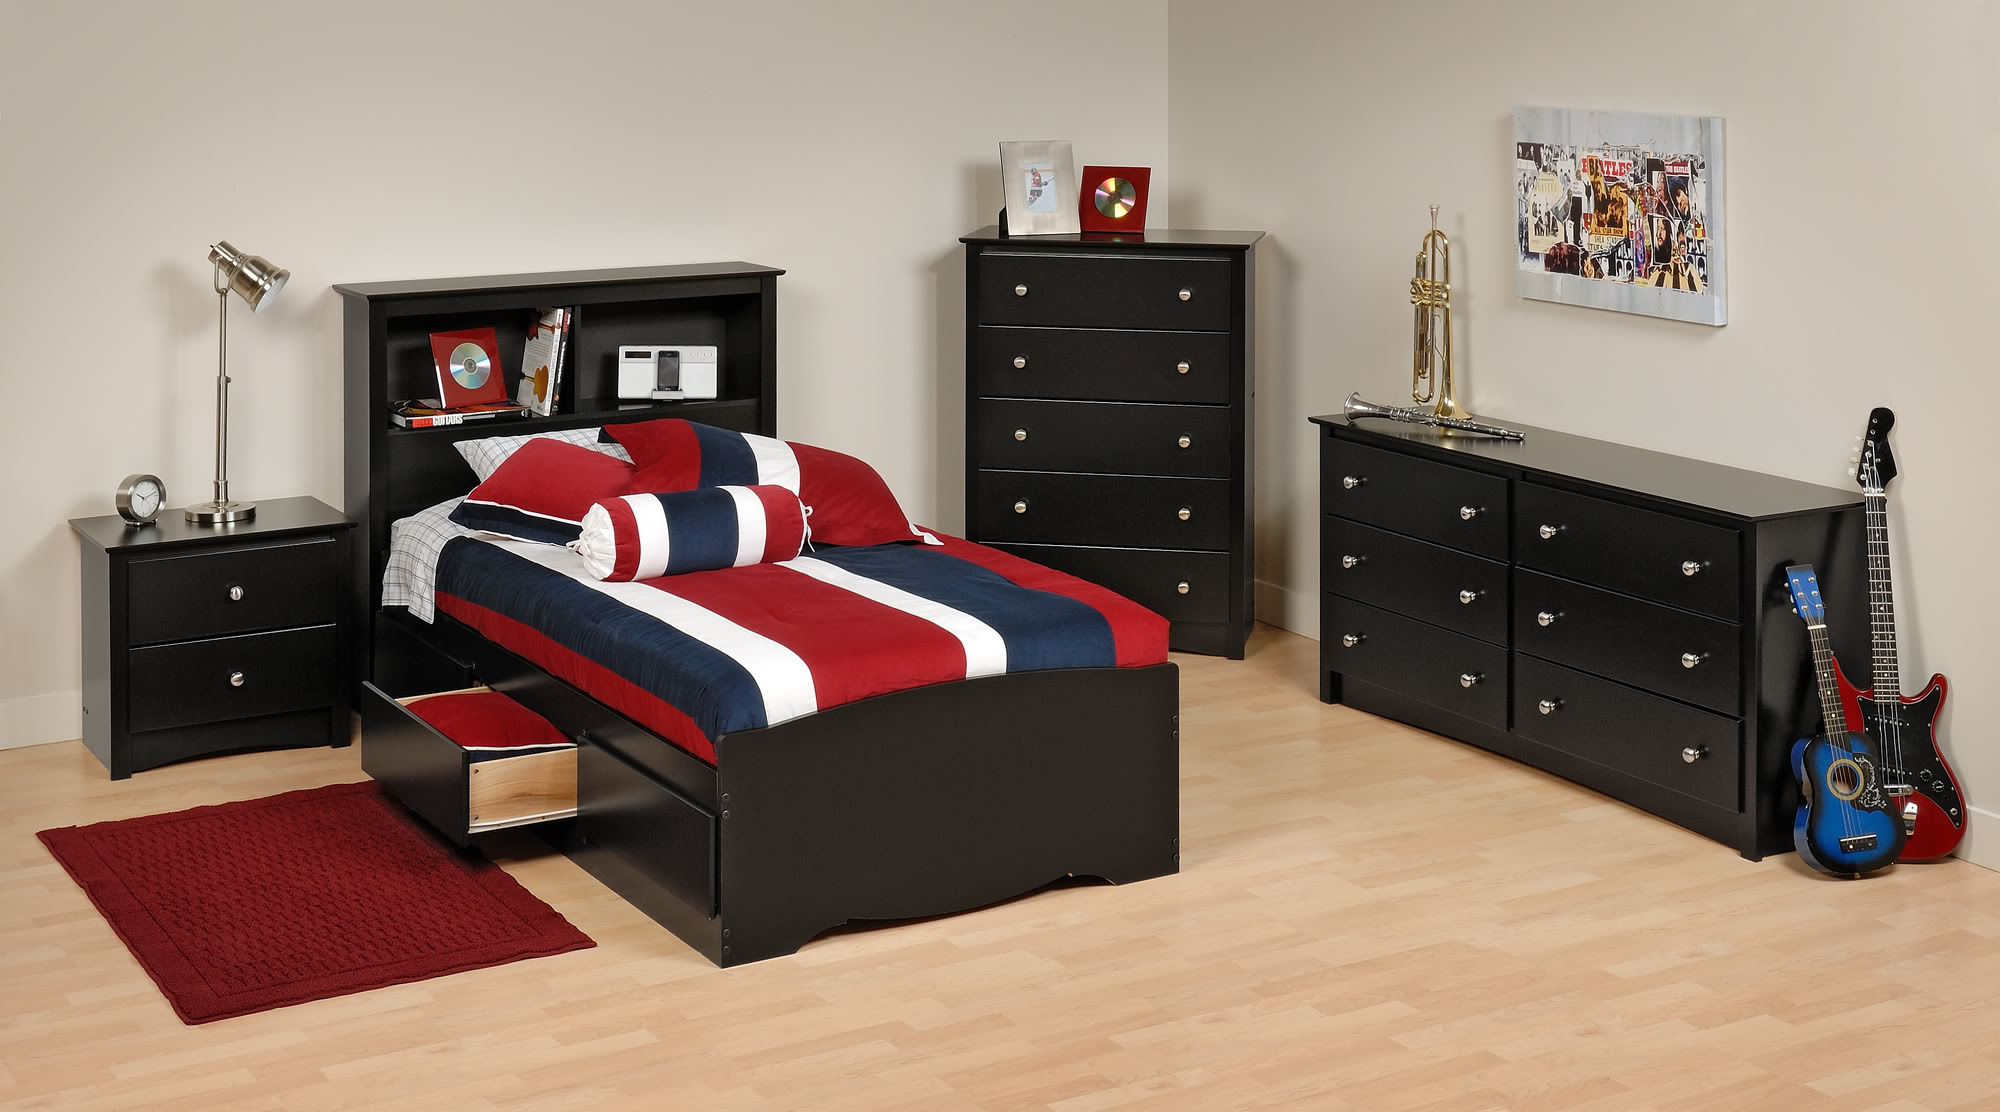 Black Twin Bedroom Furniture Home Decor Photos Gallery throughout size 2000 X 1112